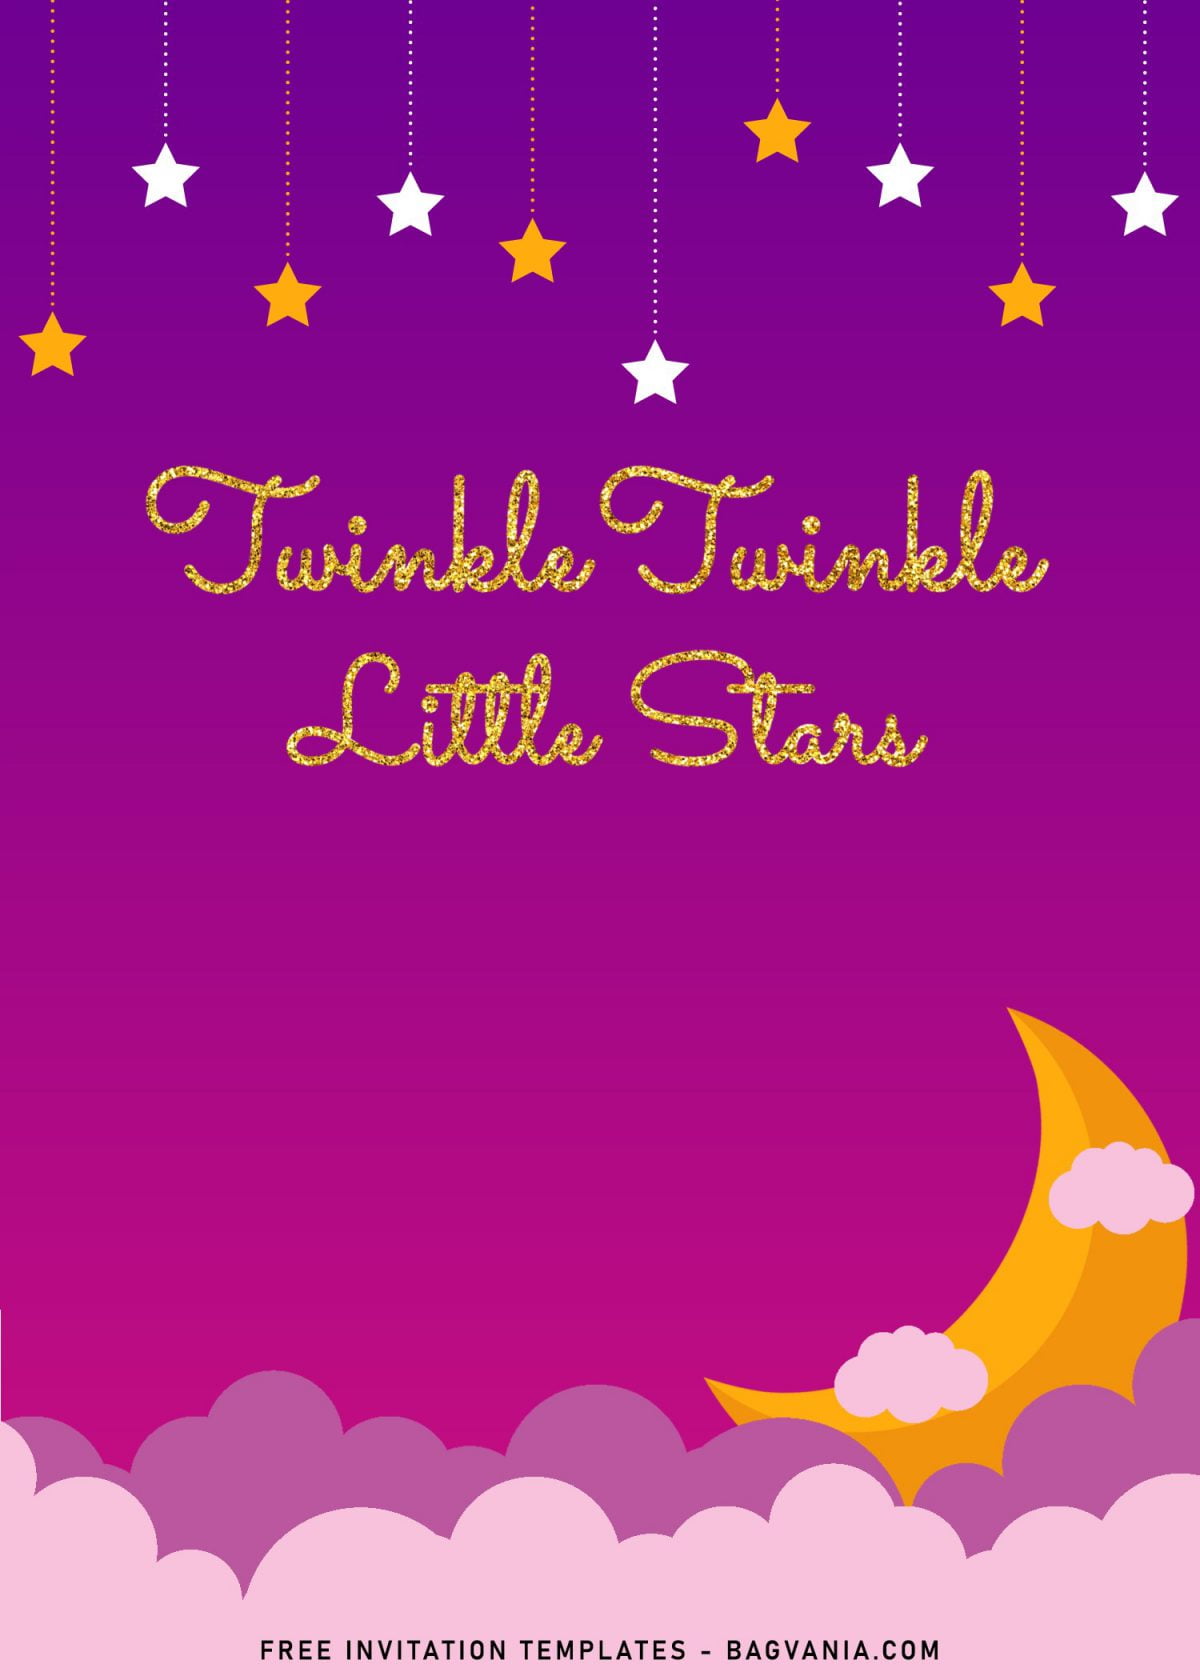 10+ Twinkle Twinkle Little Star Birthday Invitation Templates and has portrait design